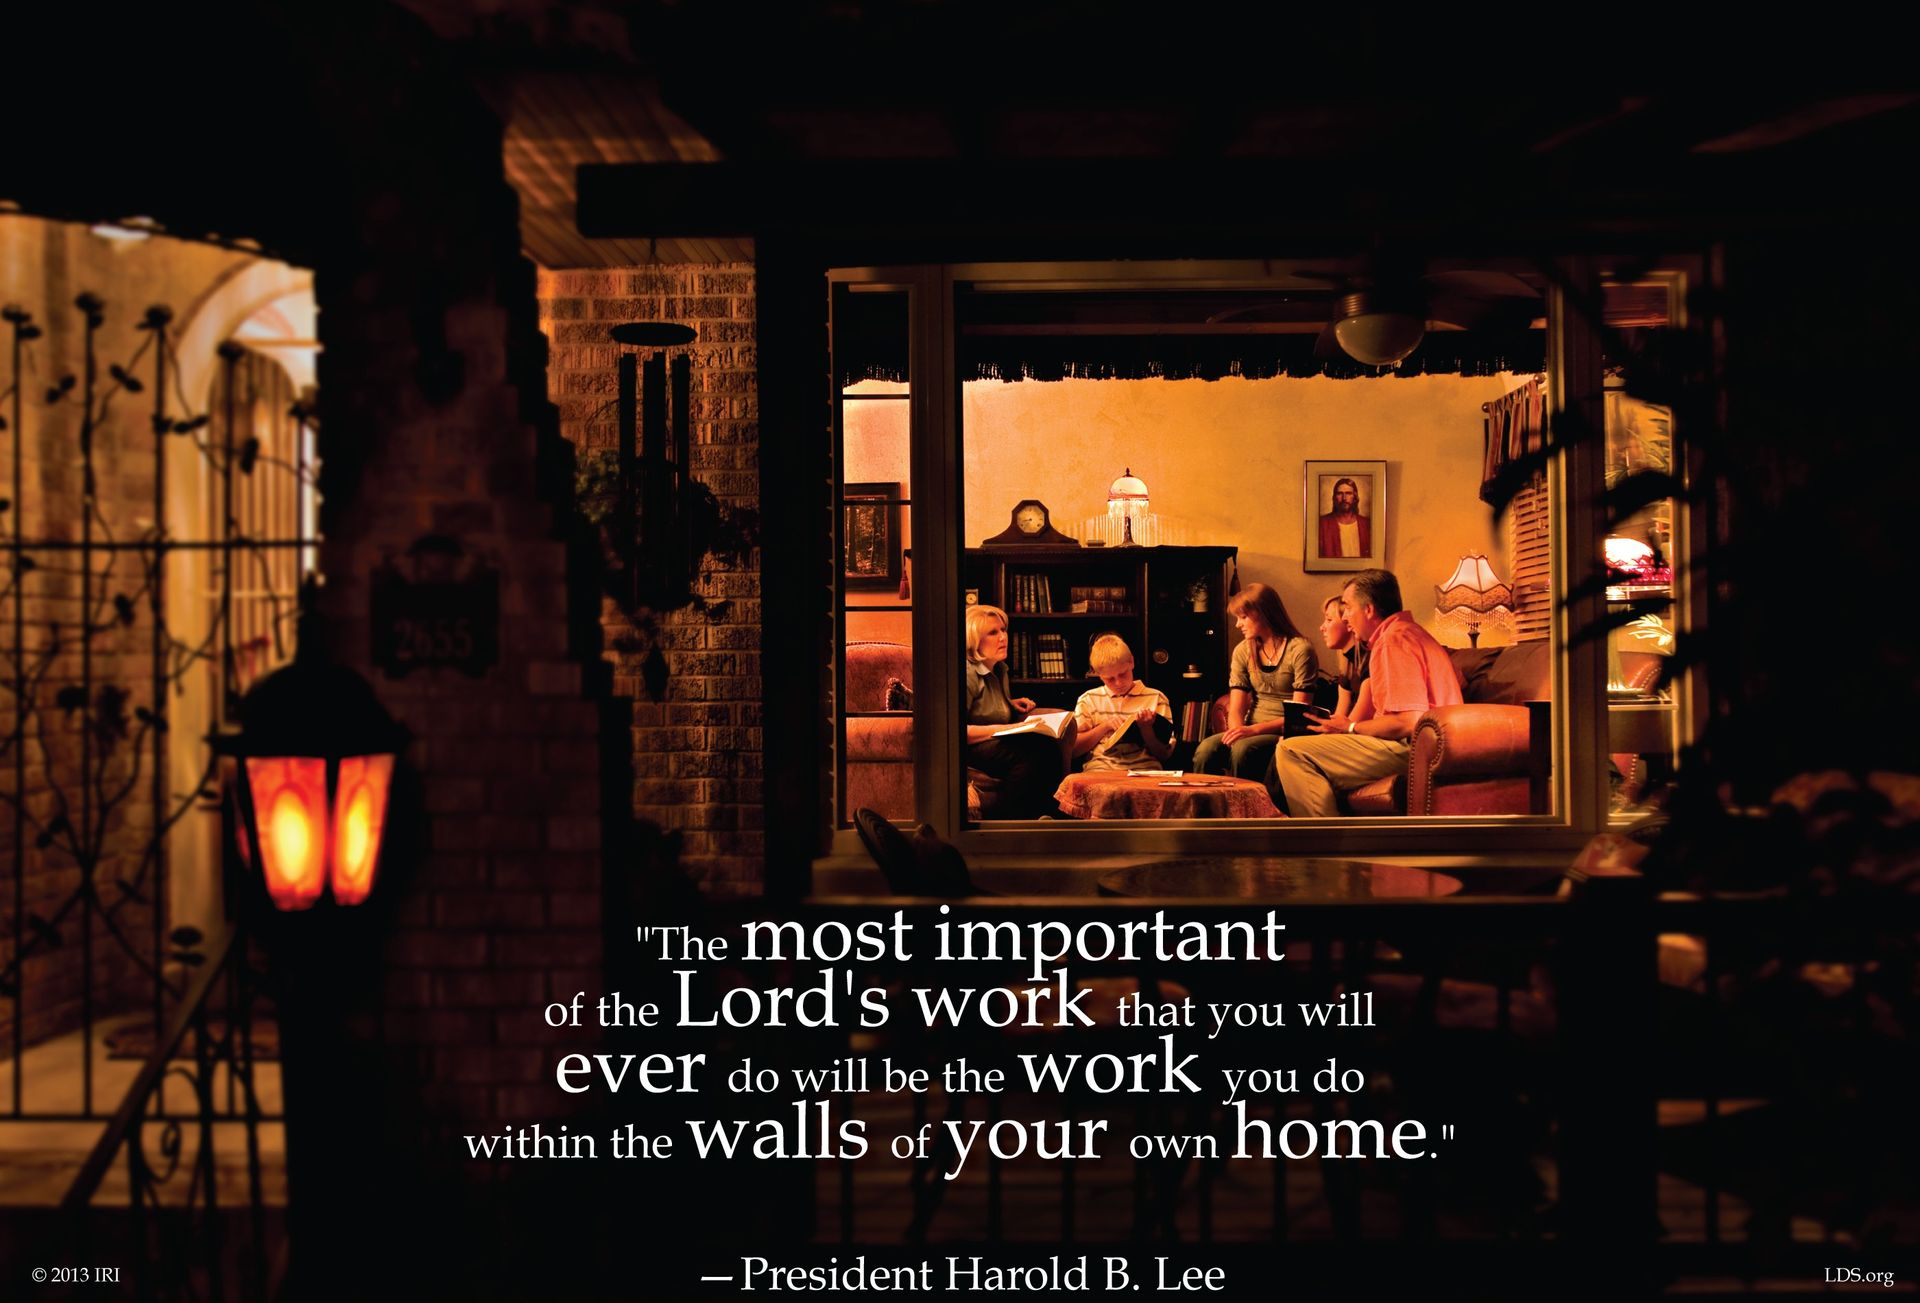 “The most important of the Lord’s work that you will ever do will be the work you do within the walls of your own home.”—President Harold B. Lee, Teachings of Presidents of the Church: Harold B. Lee (2000), 134 © undefined ipCode 1.